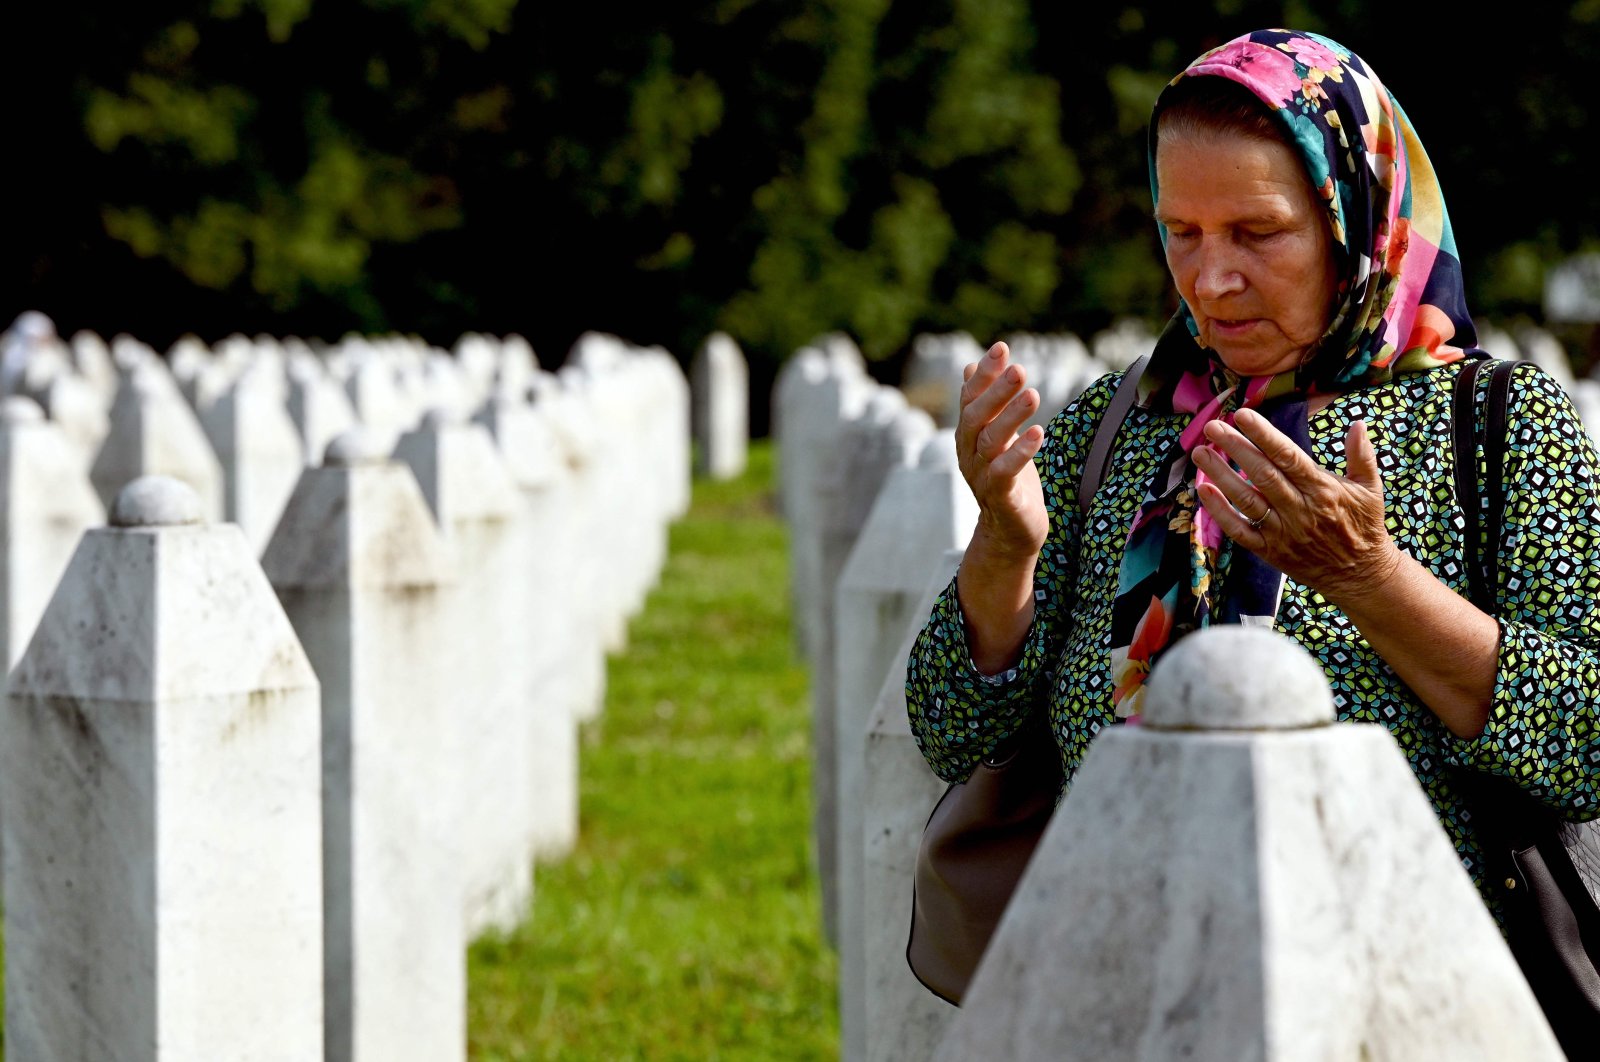 A Bosnian Muslim woman and survivor of the 1995 Srebrenica genocide mourns near the graves of relatives and victims, Srebrenica, Bosnia and Herzegovina, July 11, 2023. (AFP Photo)